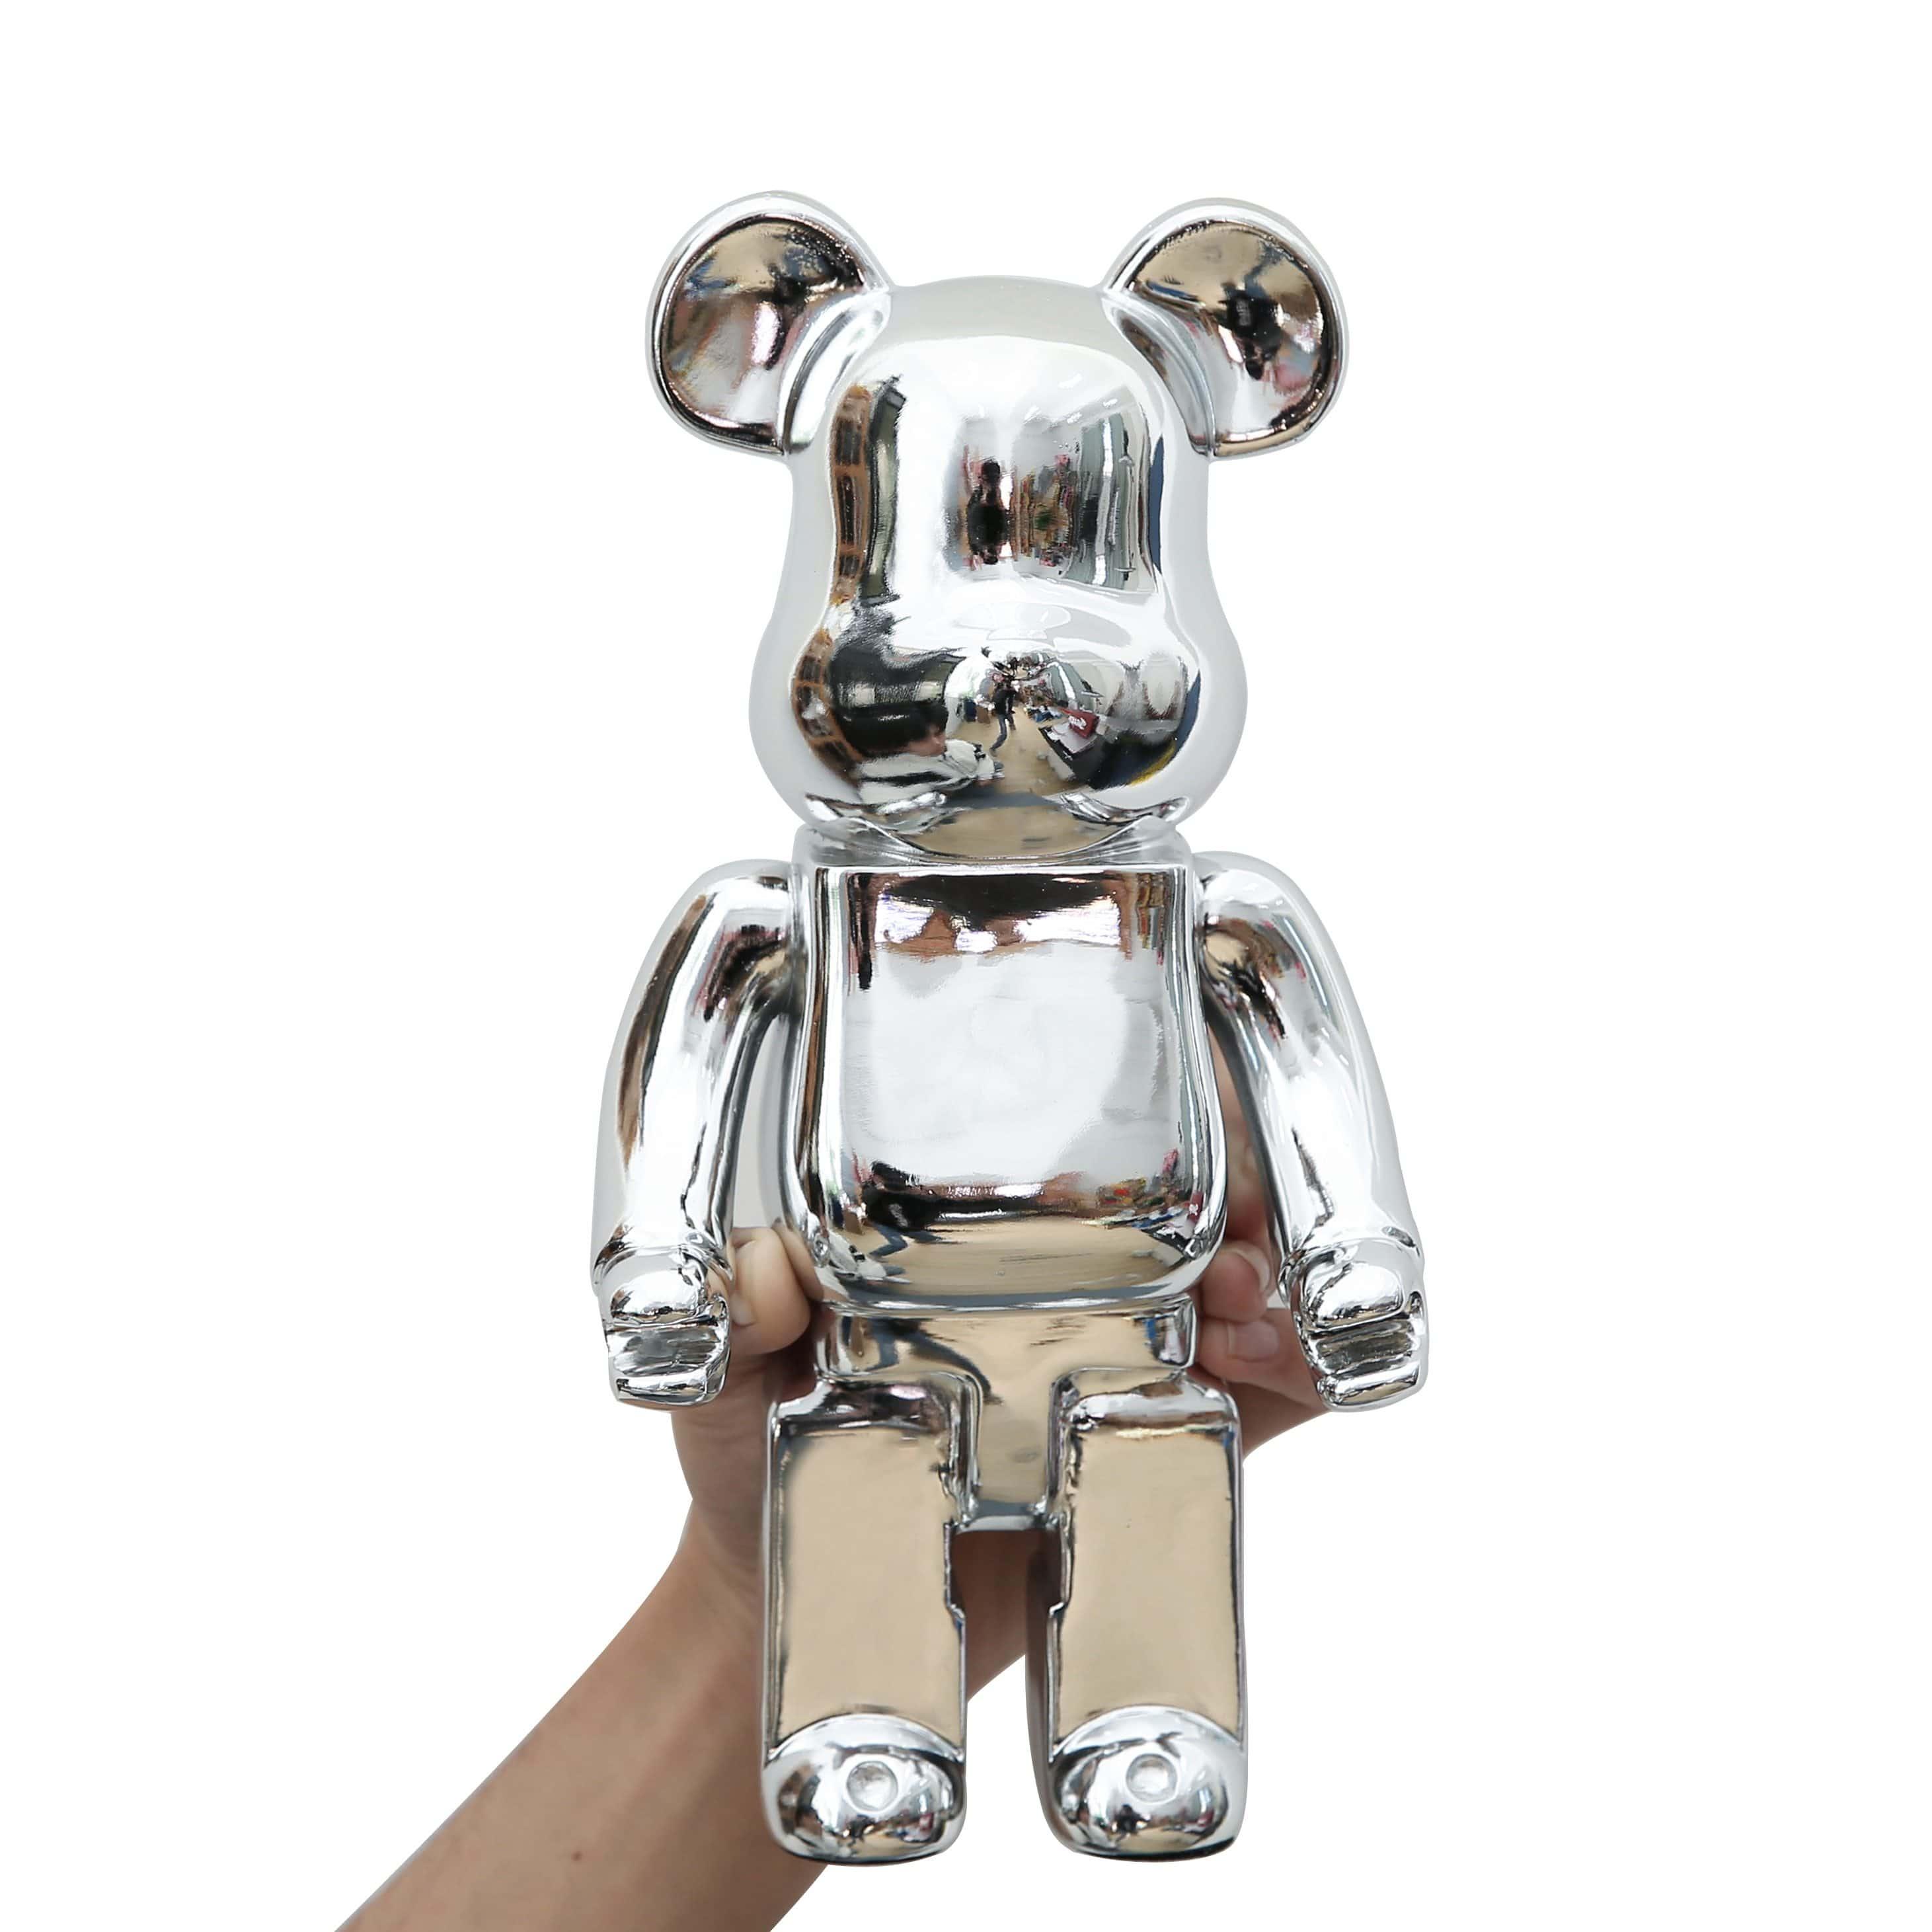 Shop 0 Bearbrick 1 Home Decoration 28Cm Bearbrick 400% Be@rbrick Games New Year's Gift Tide Play Model Plating Resin Electronic Games Kids Toys Mademoiselle Home Decor